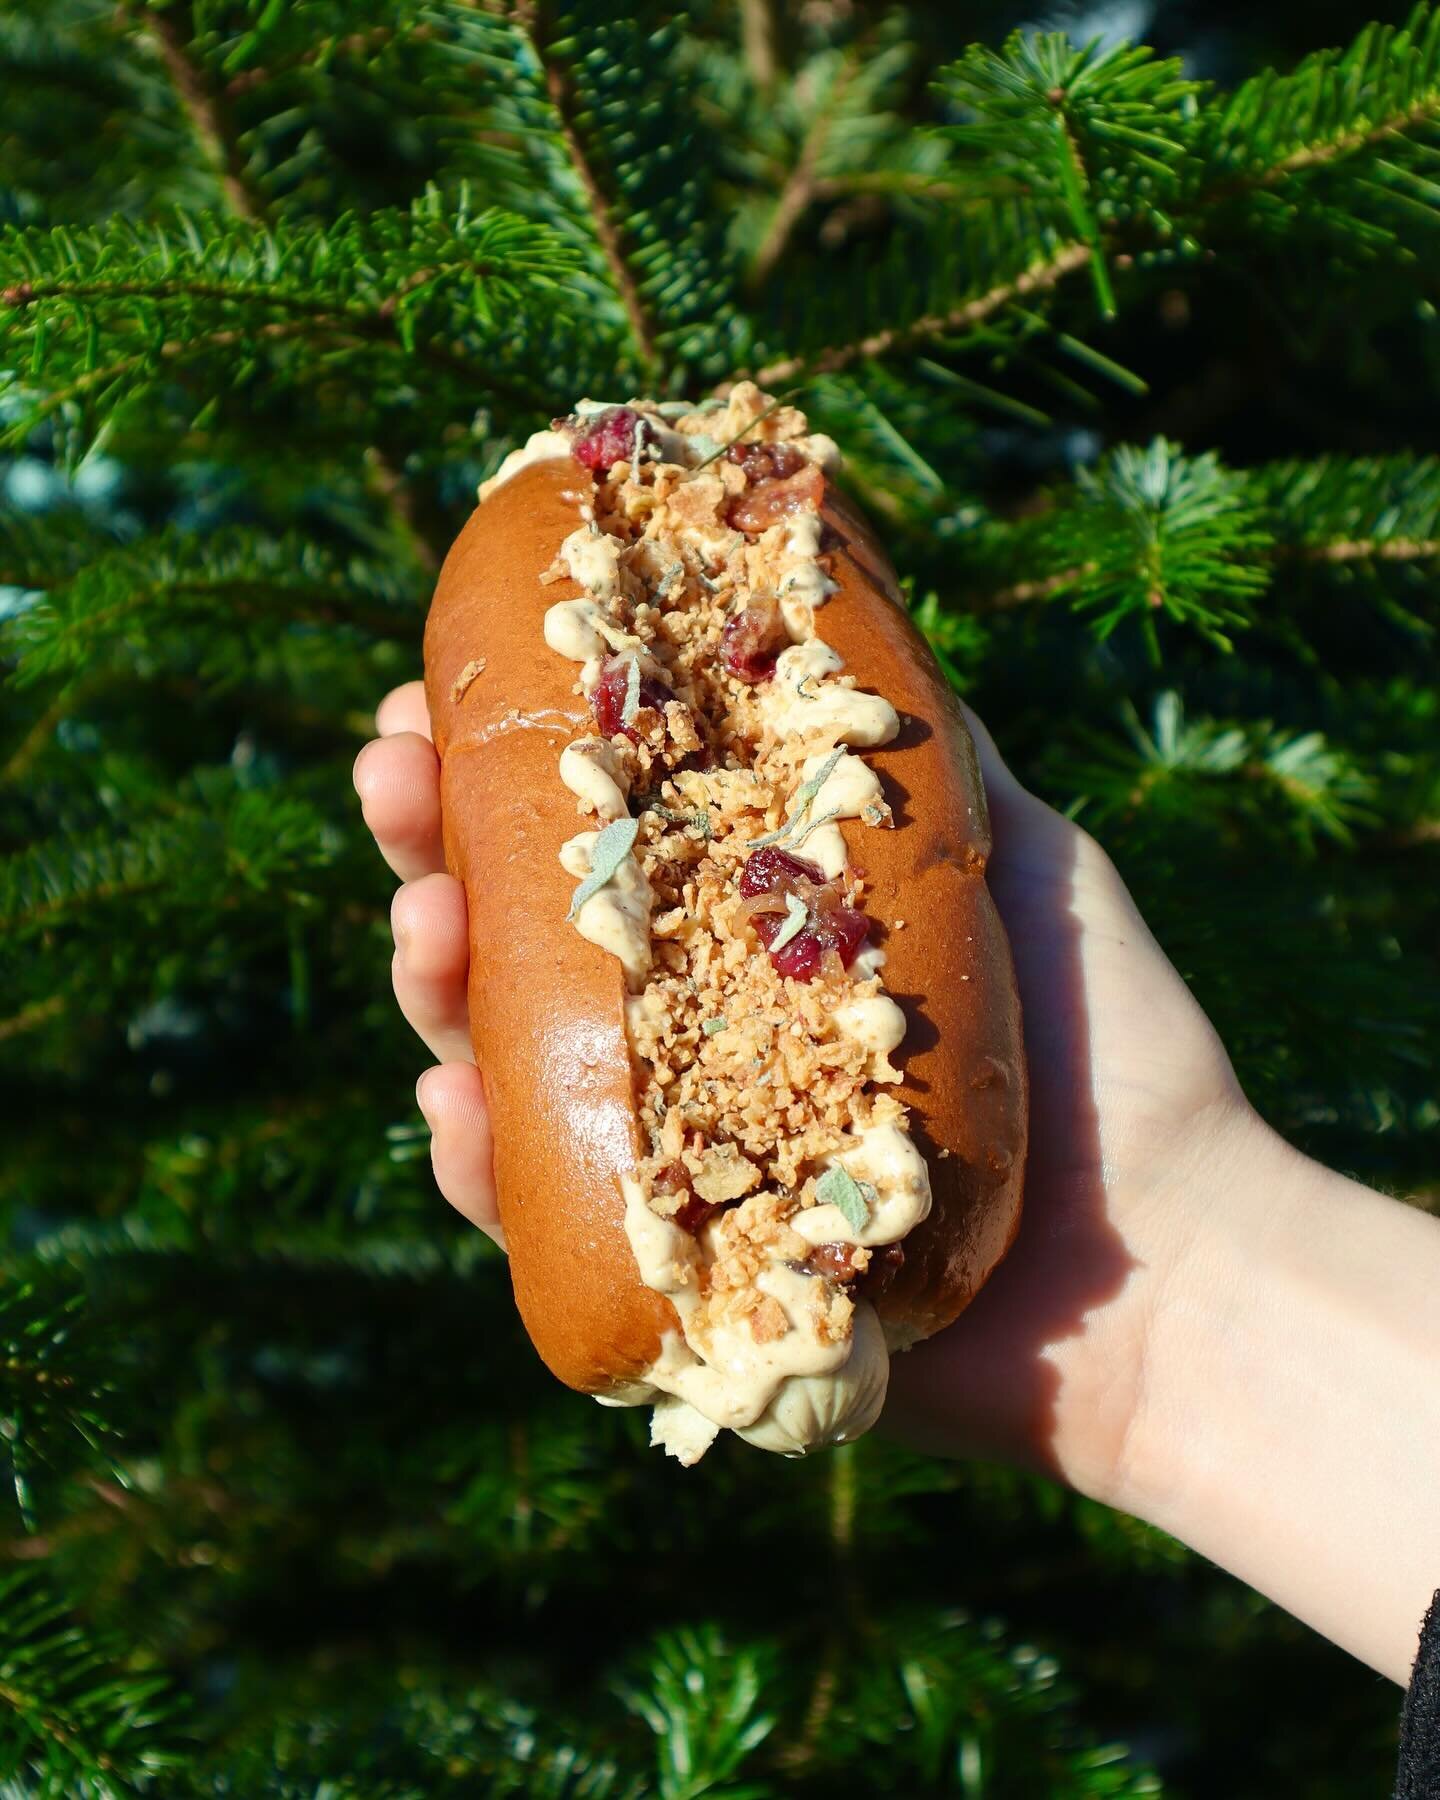 Launching tomorrow! 

🎄The Festive Dog🎄 

Ready for the @wappingwharf Christmas lights switch on! 

This dog will be available throughout the festive period.

Swipe for description ➡️
.
.
.
.
.
.
#wappingwharf #bristolchistmas #festivehotdog #brist